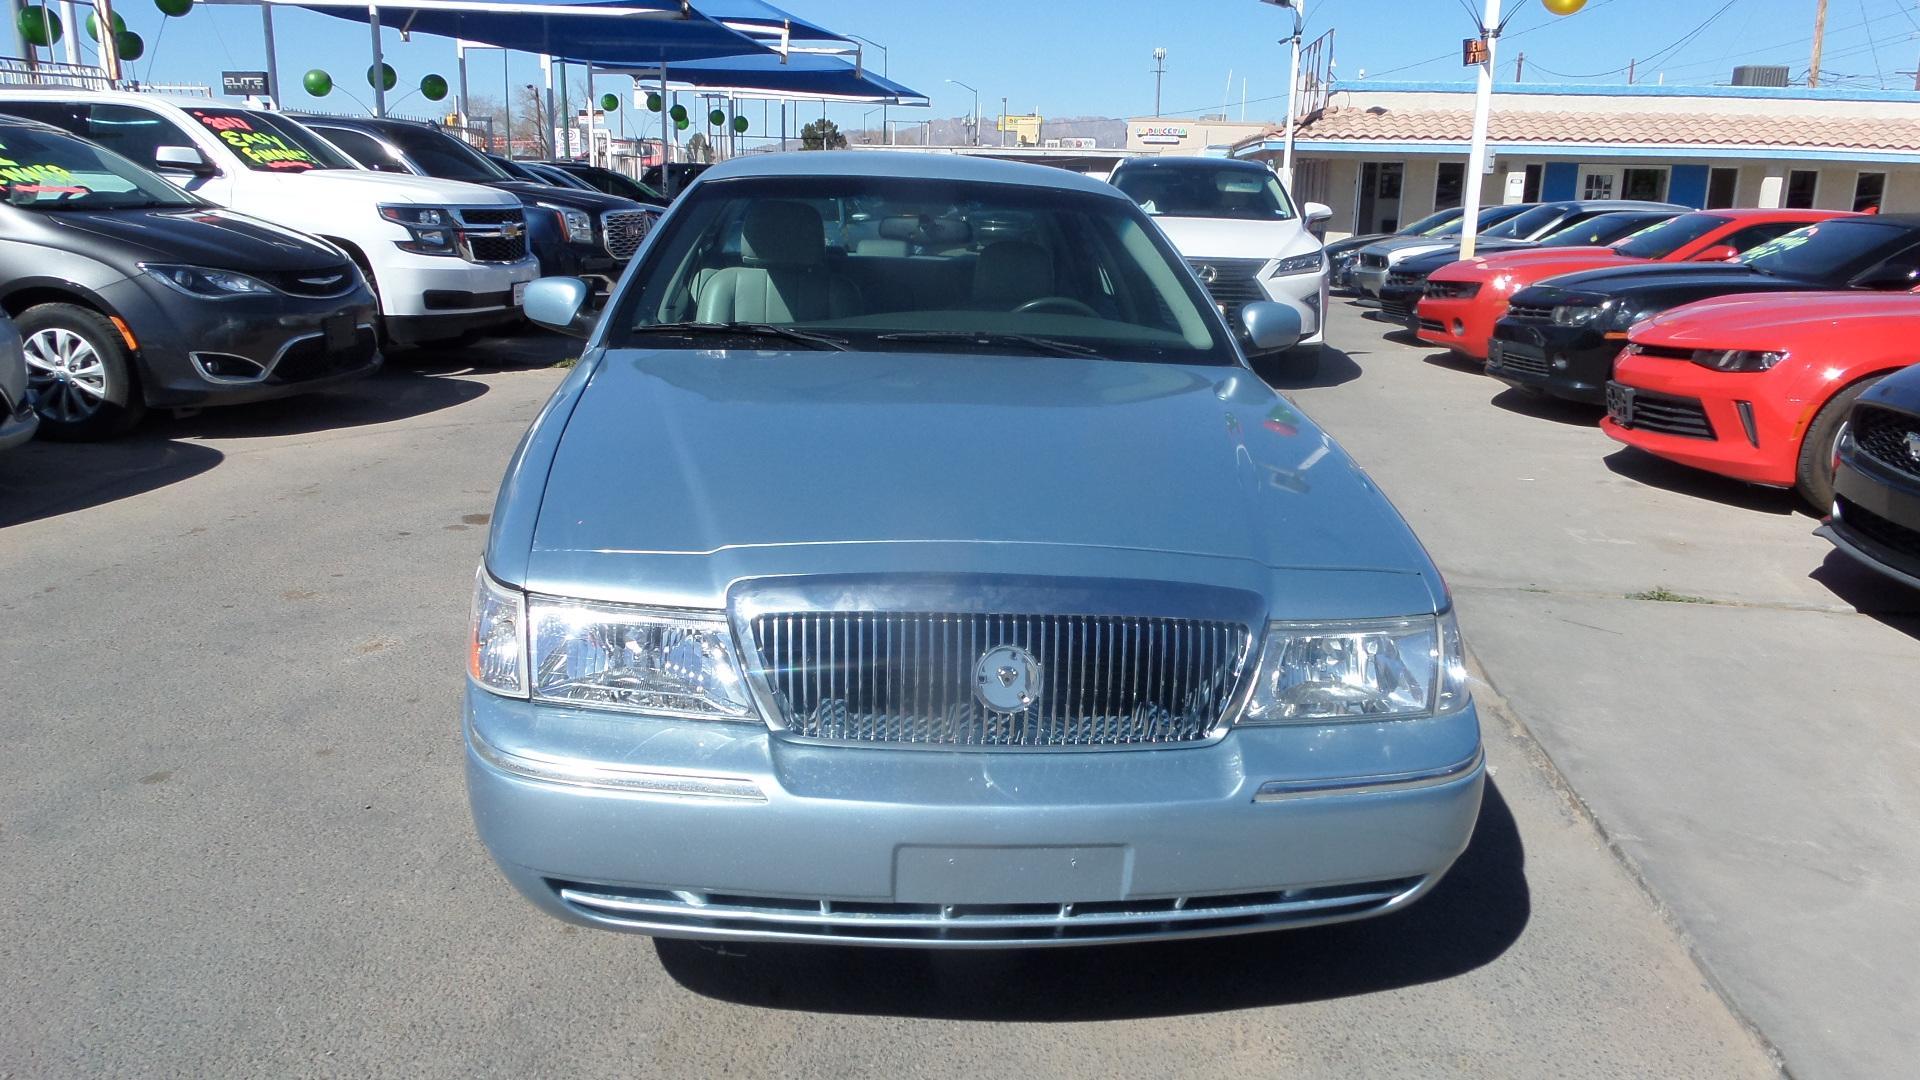 Used 2005 Mercury Grand Marquis LS with VIN 2MEFM75W45X640420 for sale in El Paso, TX